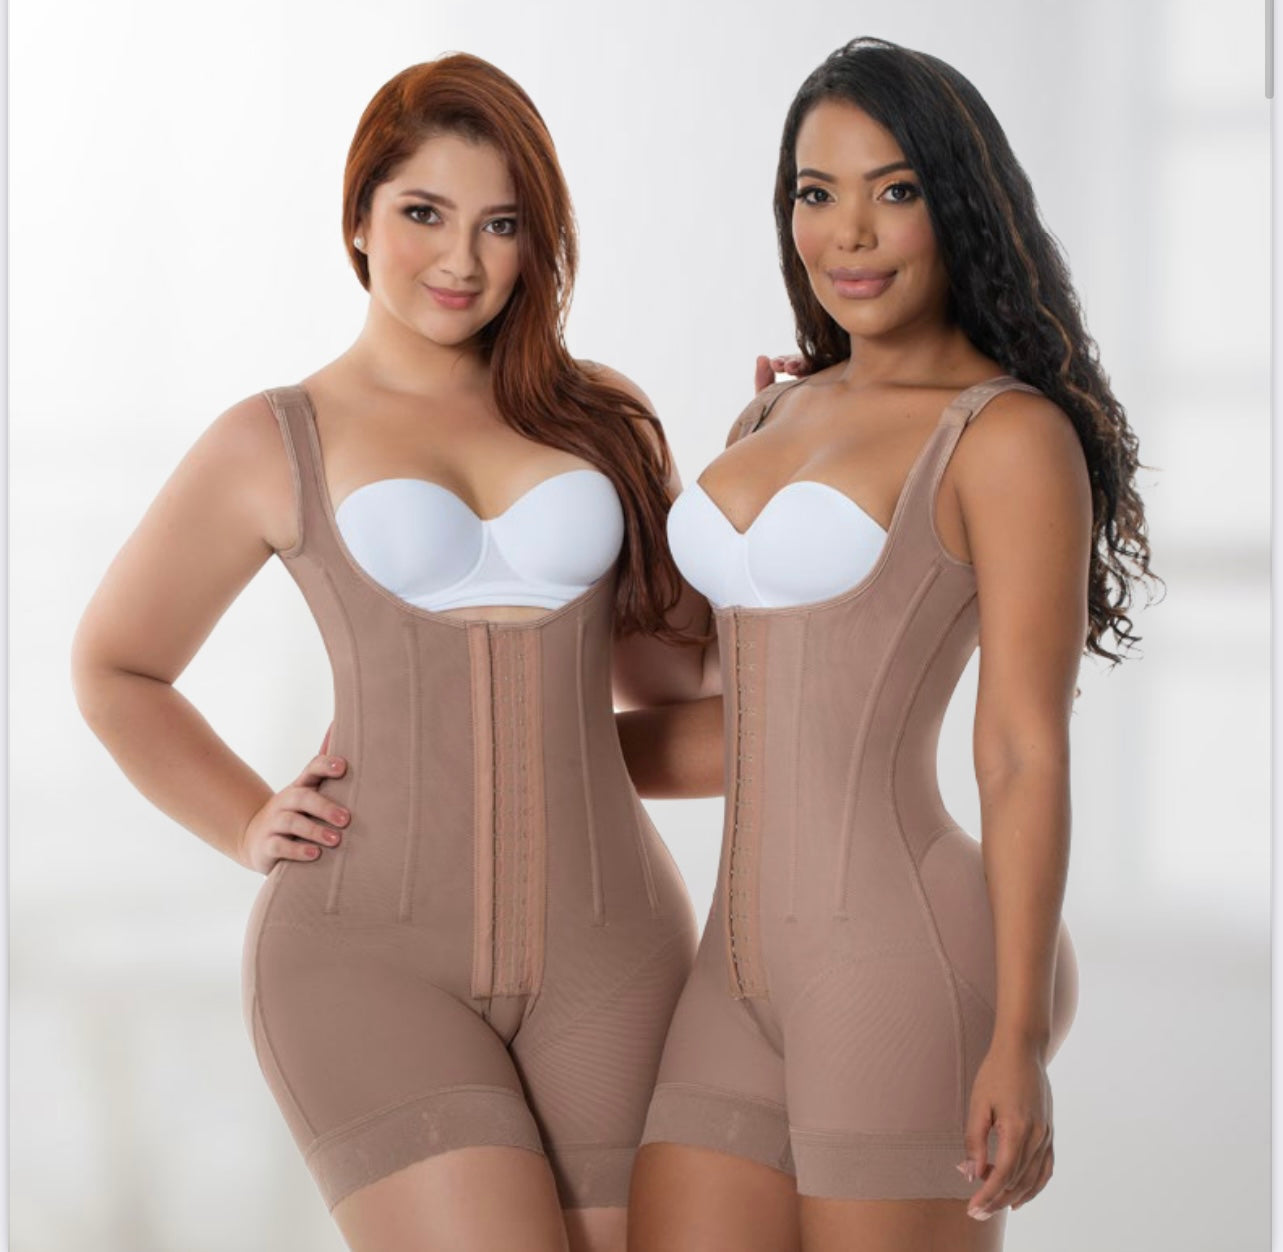 Get Your Perfect Hourglass Figure with the Aliyah Faja